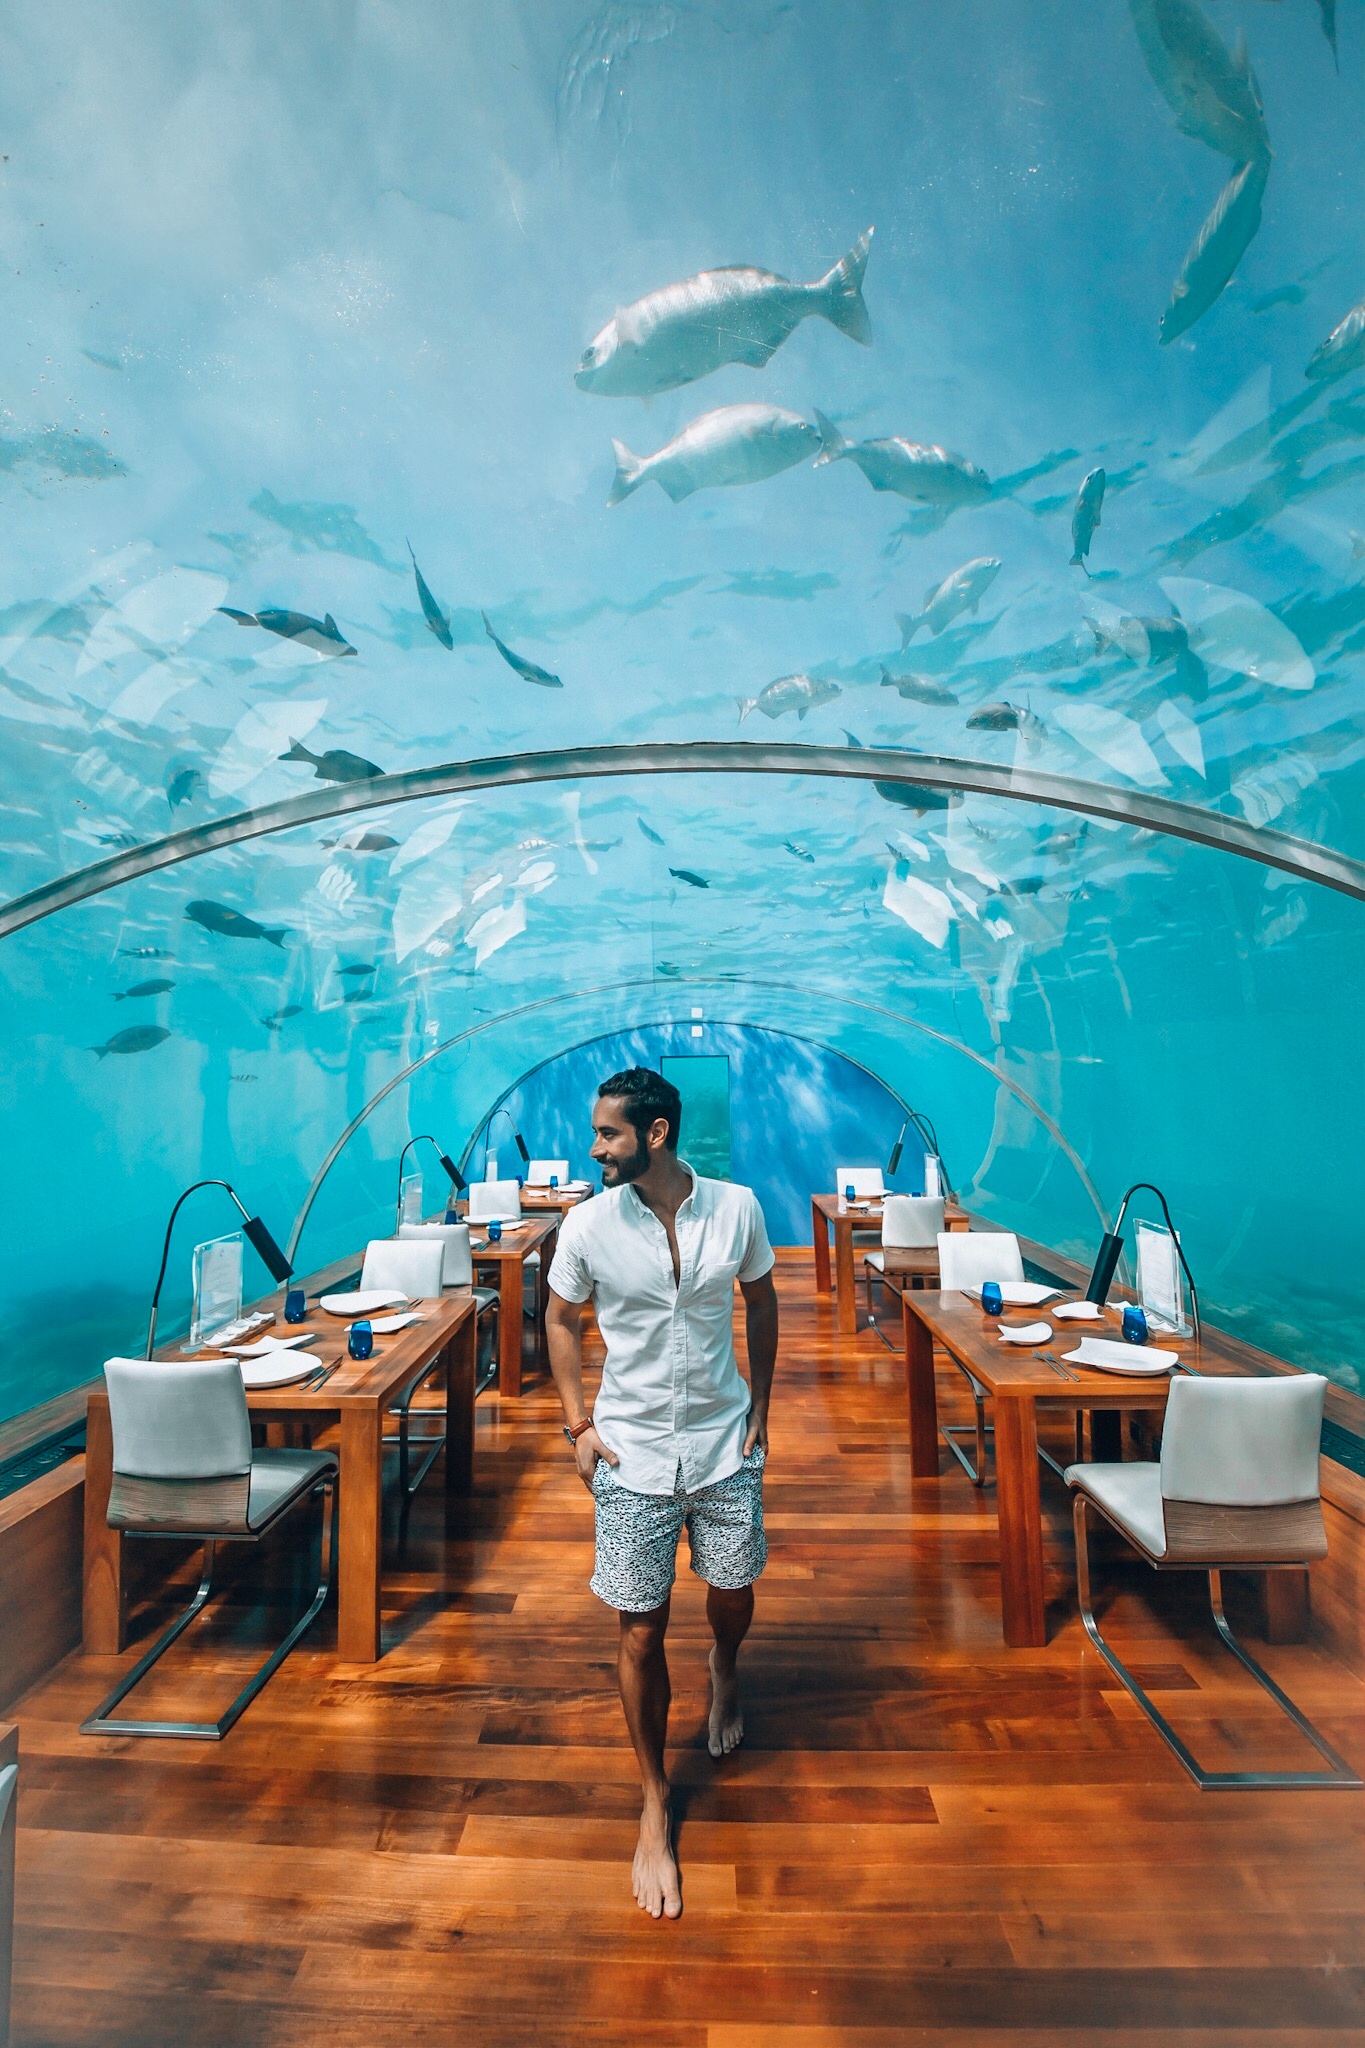  Conrad Maldives is a wonderful destination resort offering many unique experiences- the most famous perhaps being their underwater restaurant! The resort occupies two islands which are connected by a bridge. One is larger ideal for families, and the